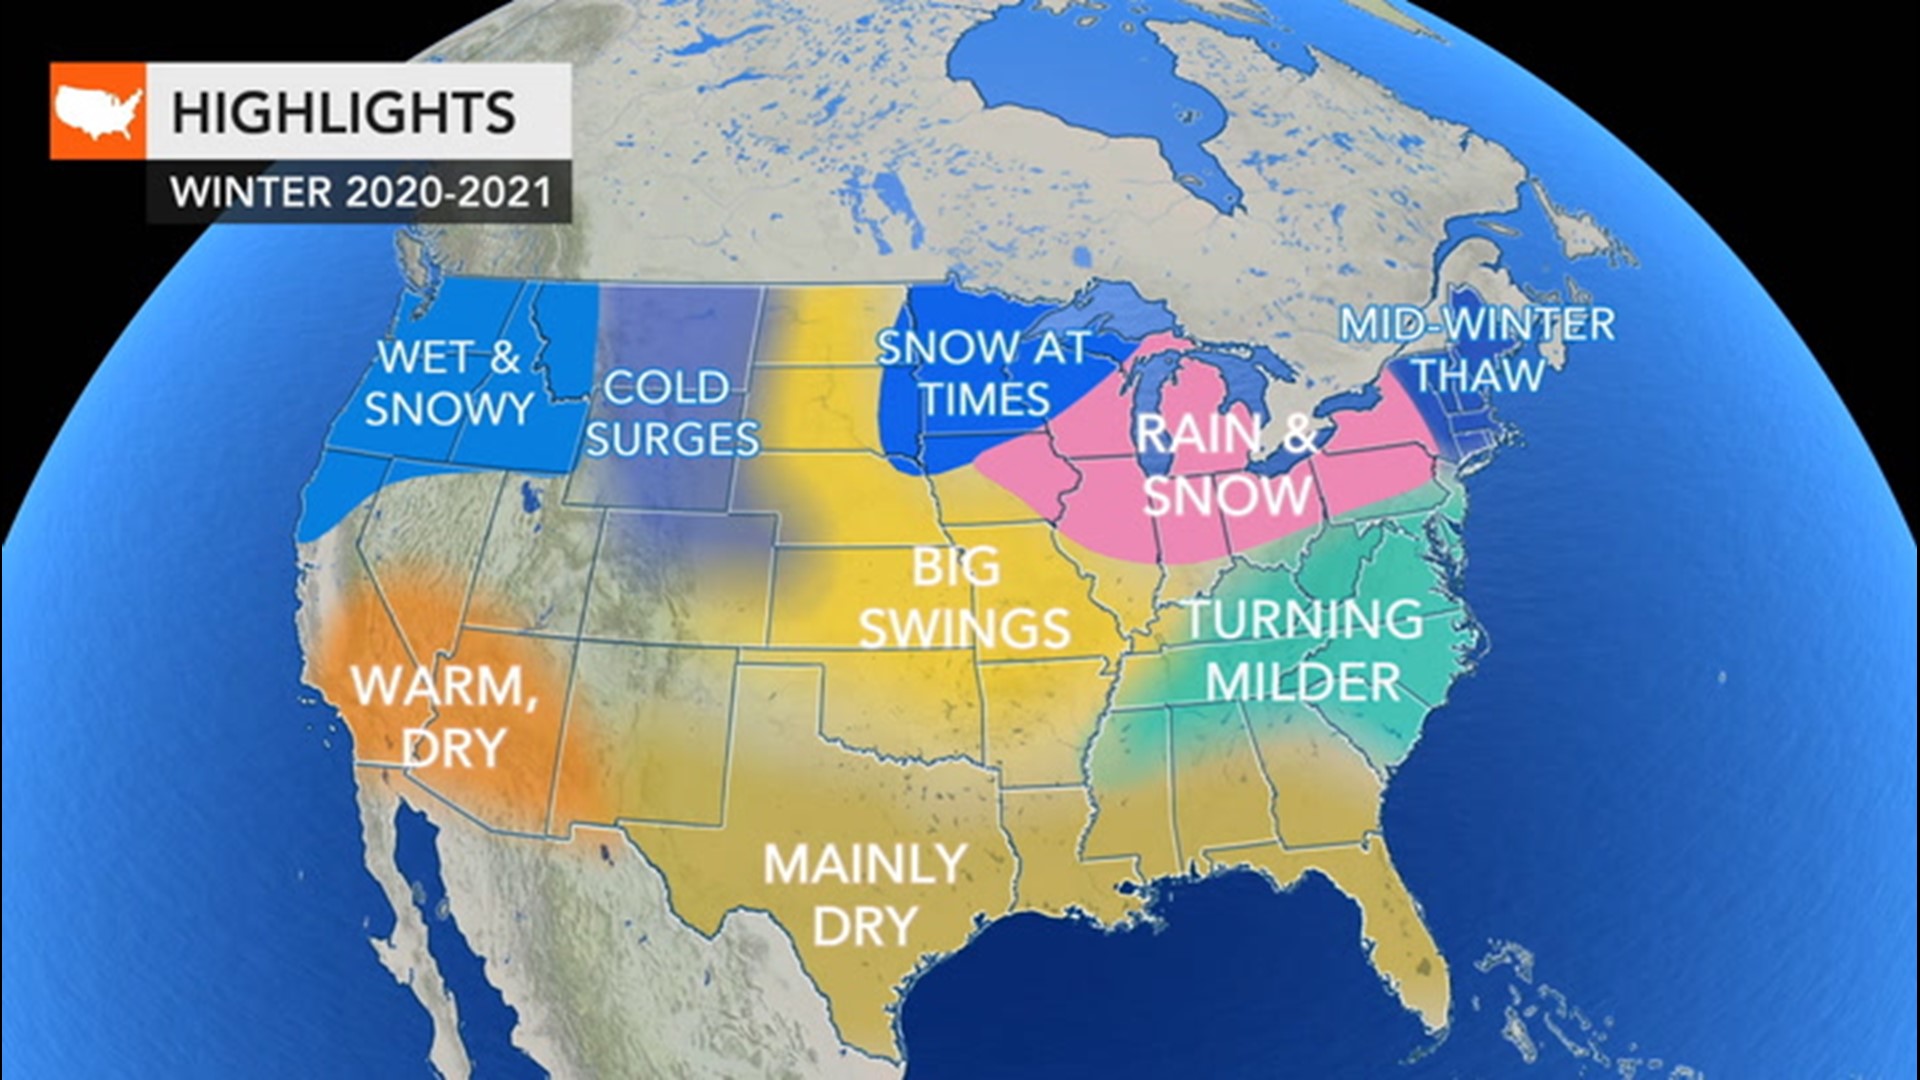 Milder weather, warmer temperatures forecast for much of the US during